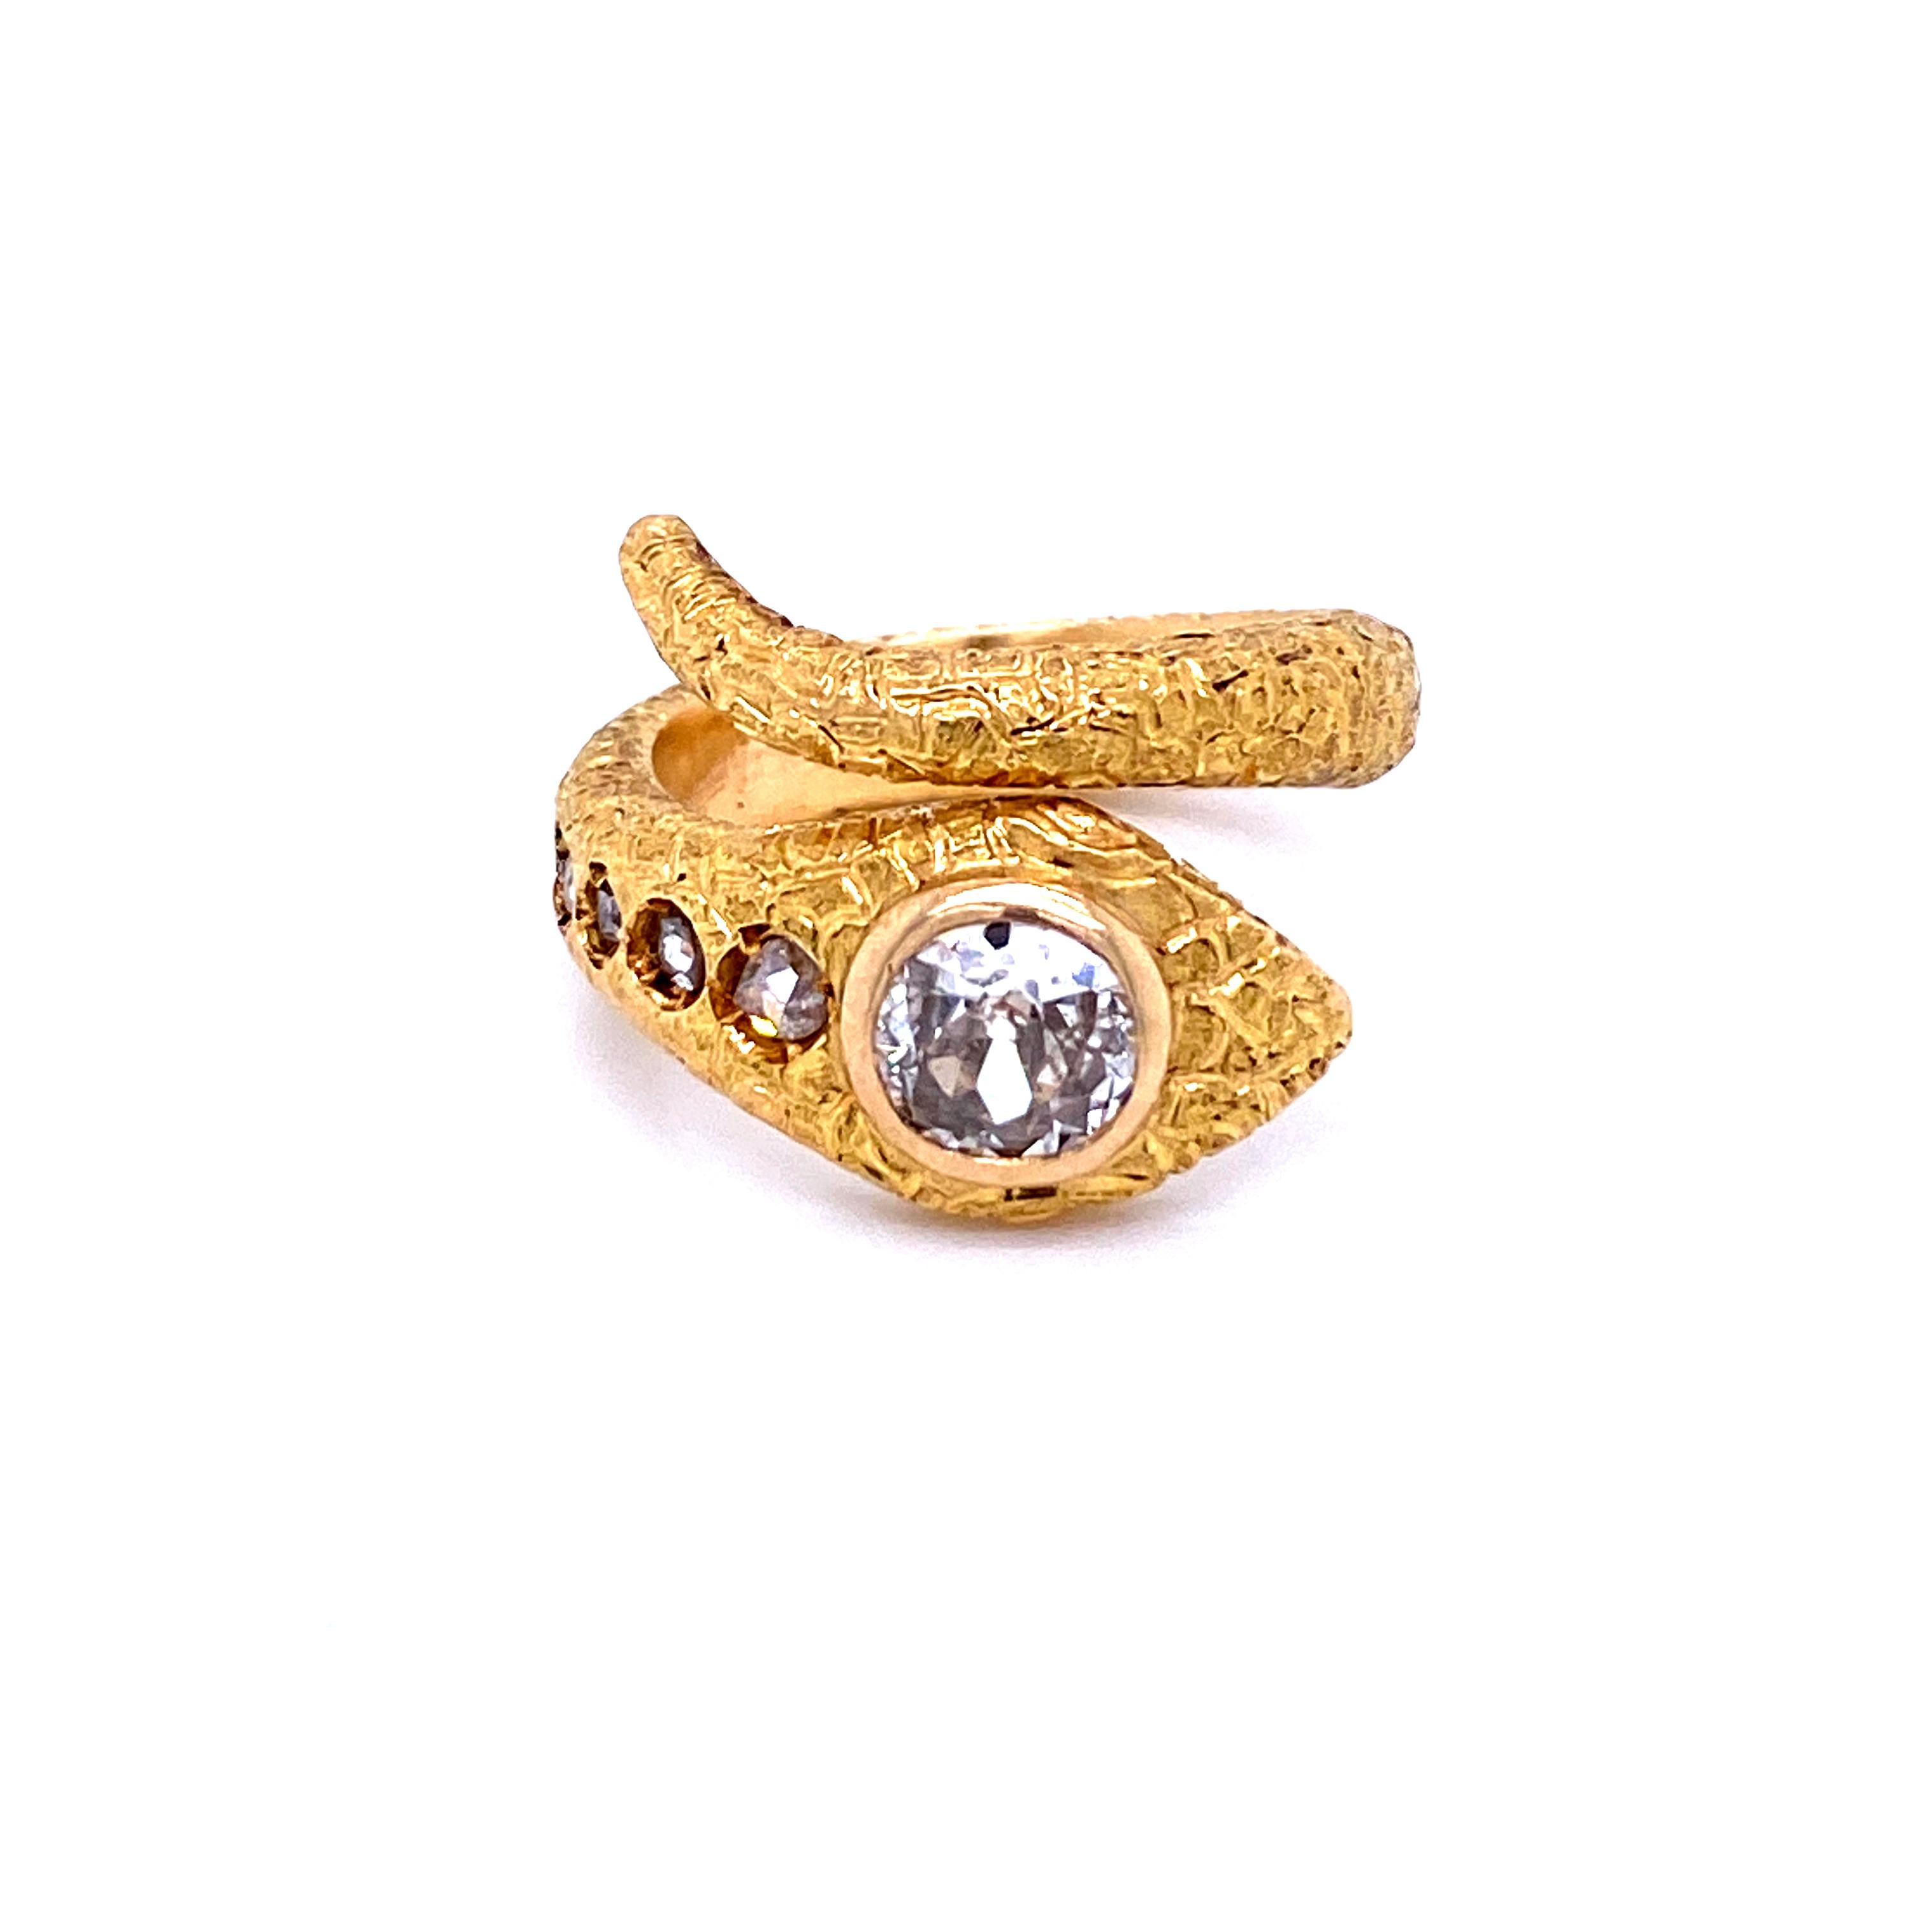 Gorgeous design ring, dated '1900, handcrafted in 18K gold. The head of the snake is embellished with a large sparkling Old mine cut Diamond eye, weight 1 Carat graded I Color Si1, and following 5 smaller diamonds in order of size, total weight 0.25